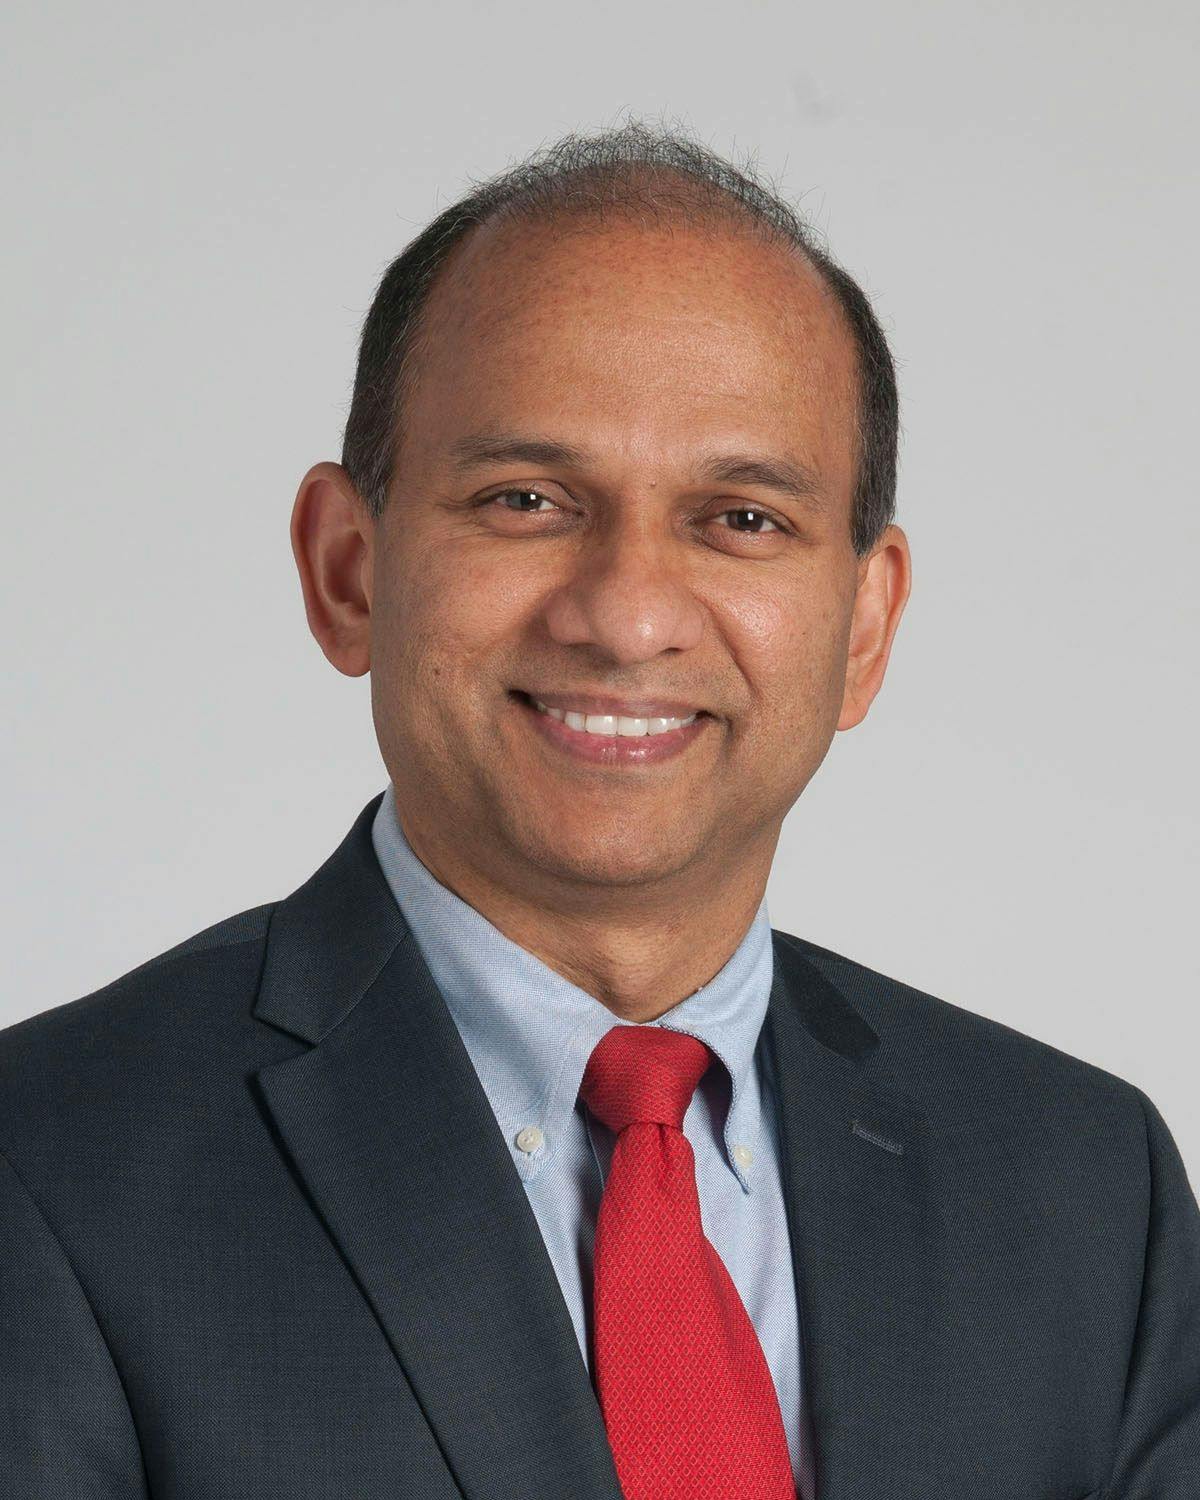 Jame Abraham, Director of Cleveland Clinic's Breast Medical Oncology Program